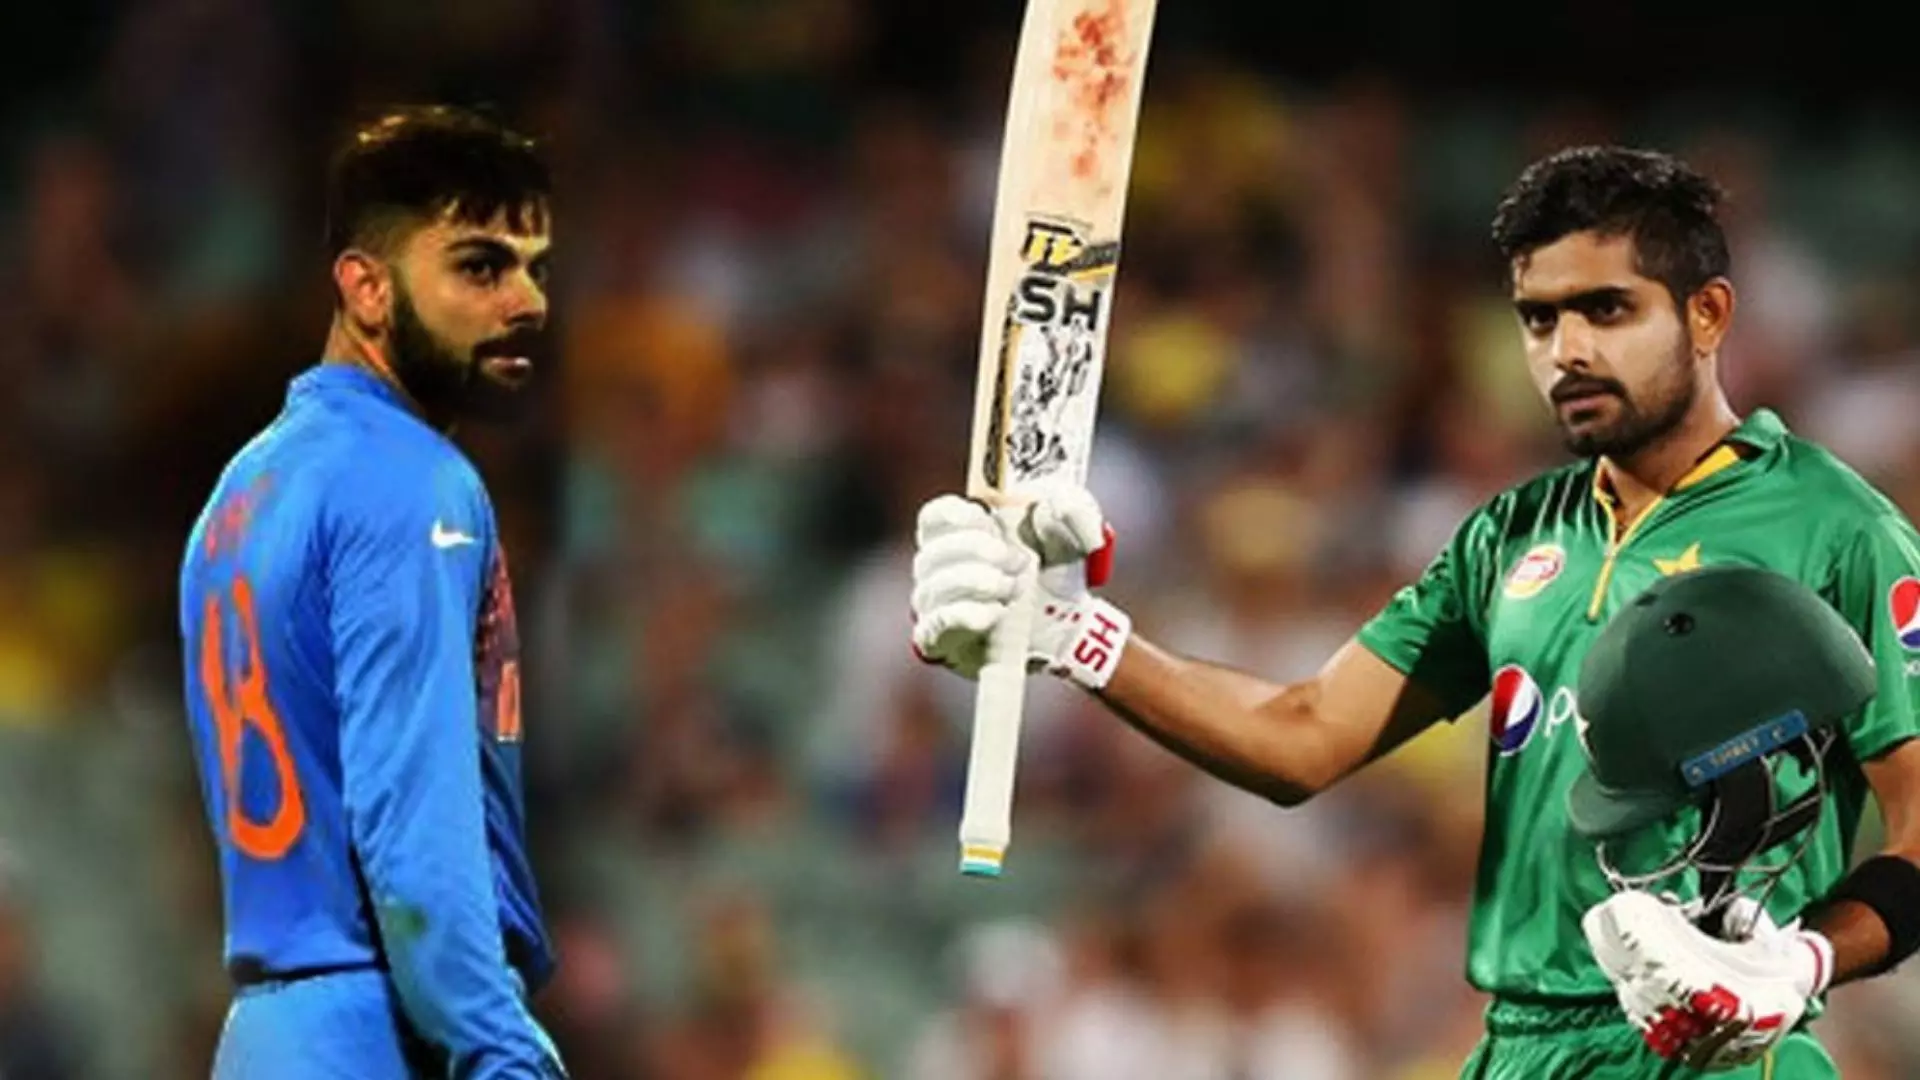 Pakistan Captain Babar Azam Says We will Win Against India in Ind vs Pak in T20 World Cup 2021